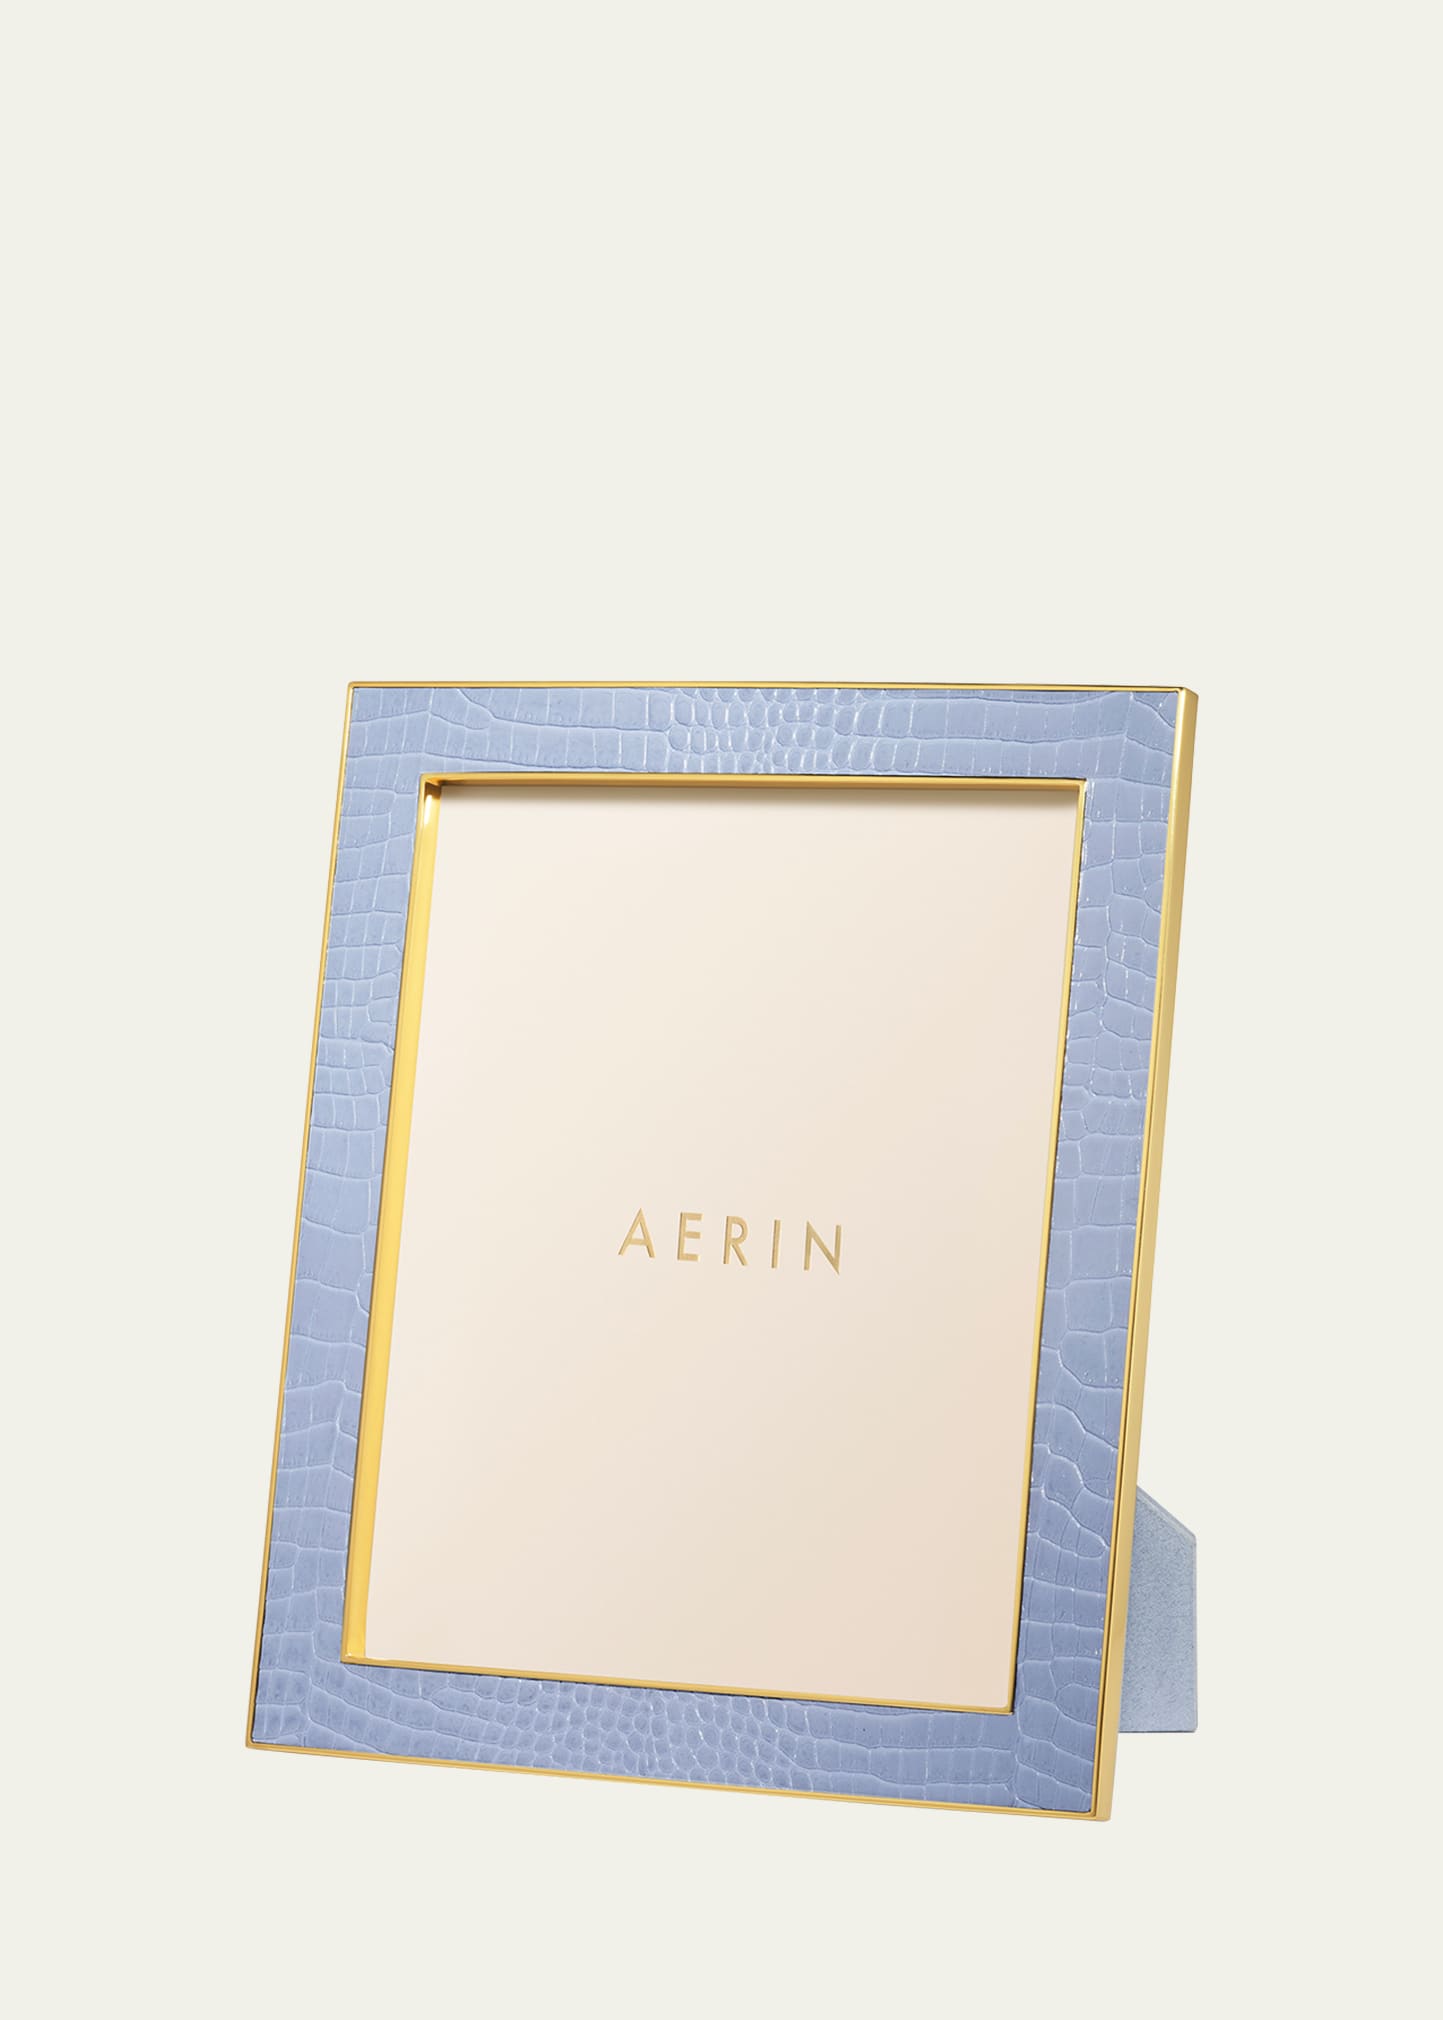 Aerin Classic Croc Leather Photo Frame, 8" X 10" In Blue